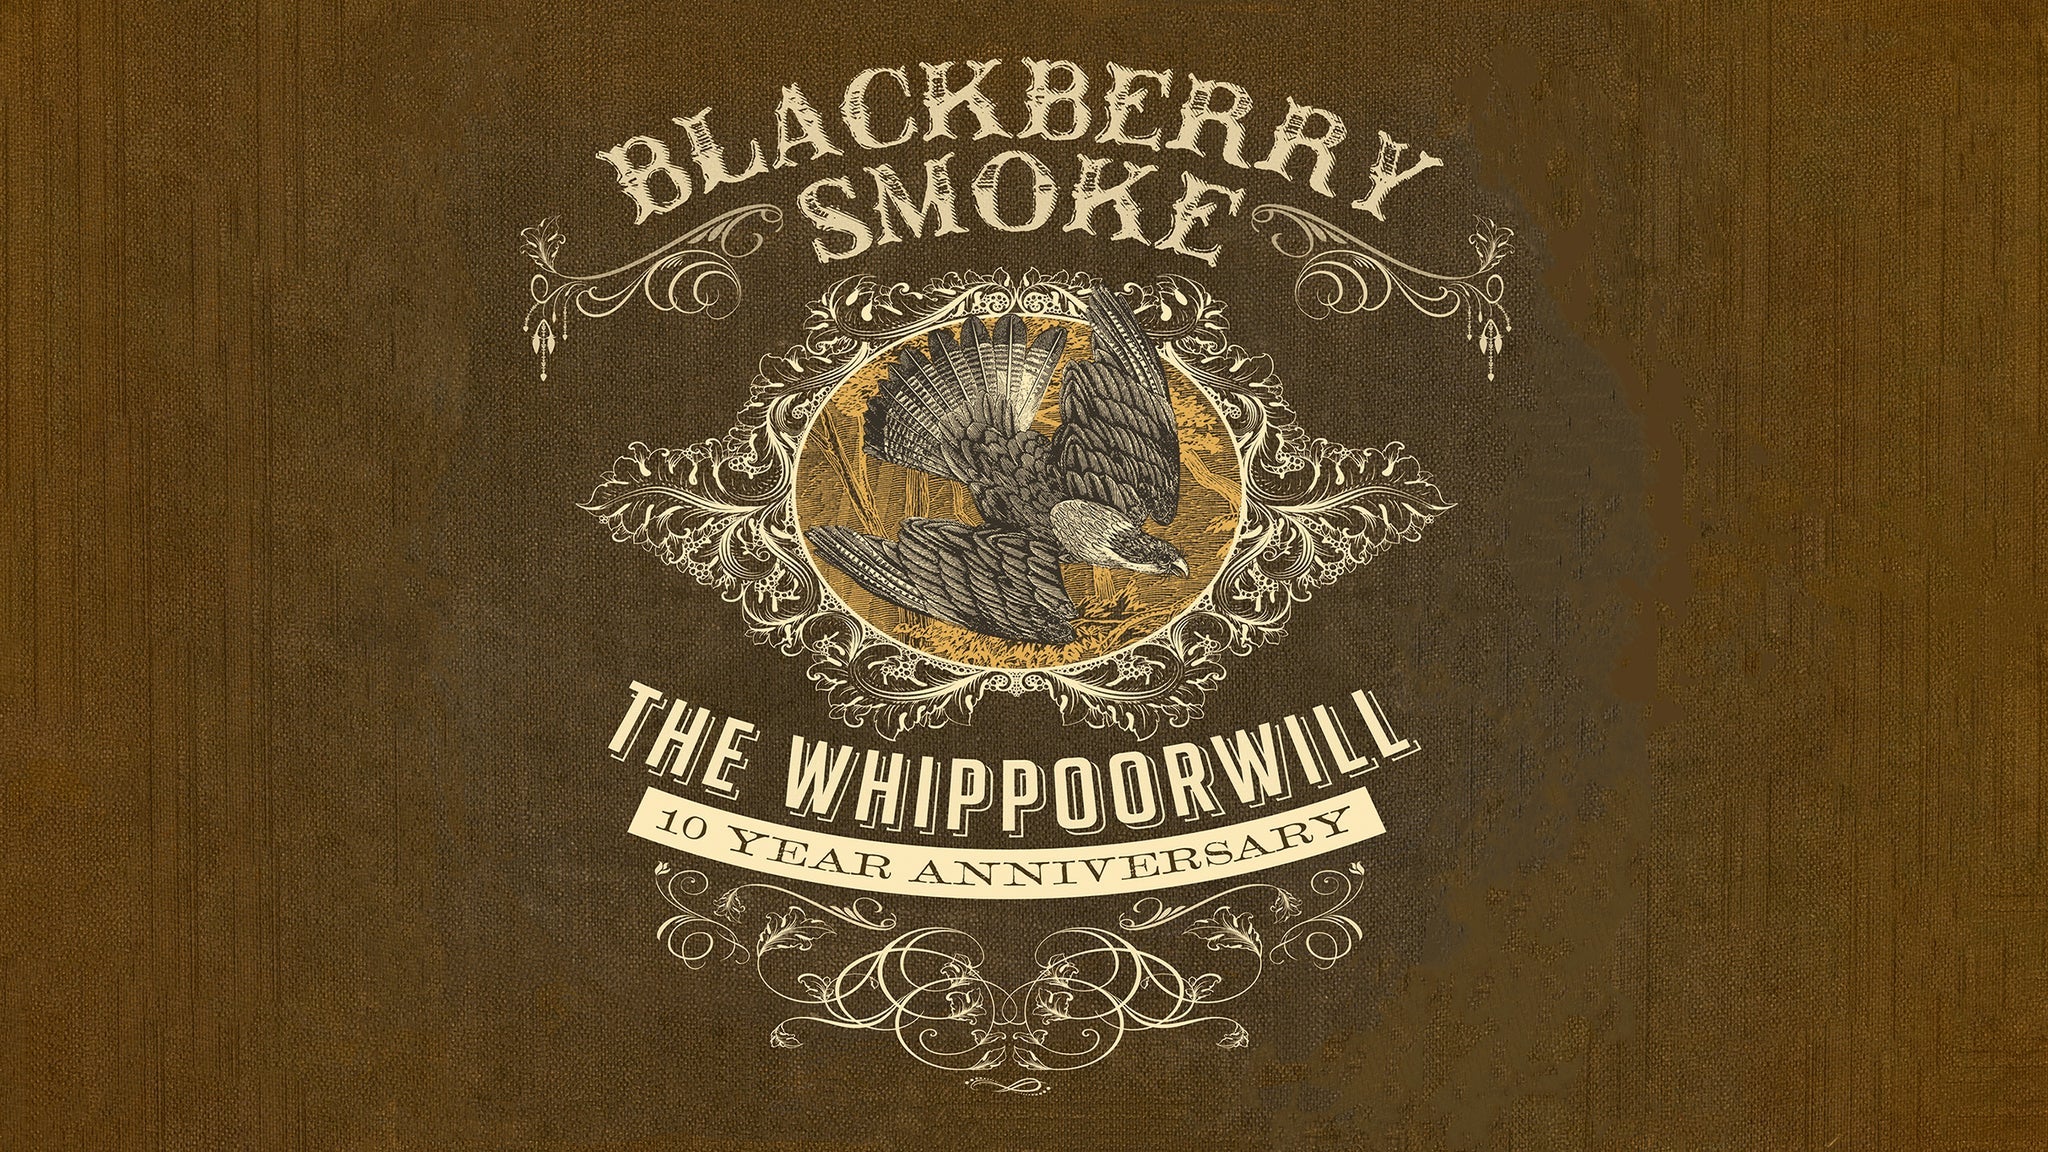 Blackberry Smoke - The Whippoorwill 10 Year Anniversary in Charlottesville promo photo for Artist presale offer code